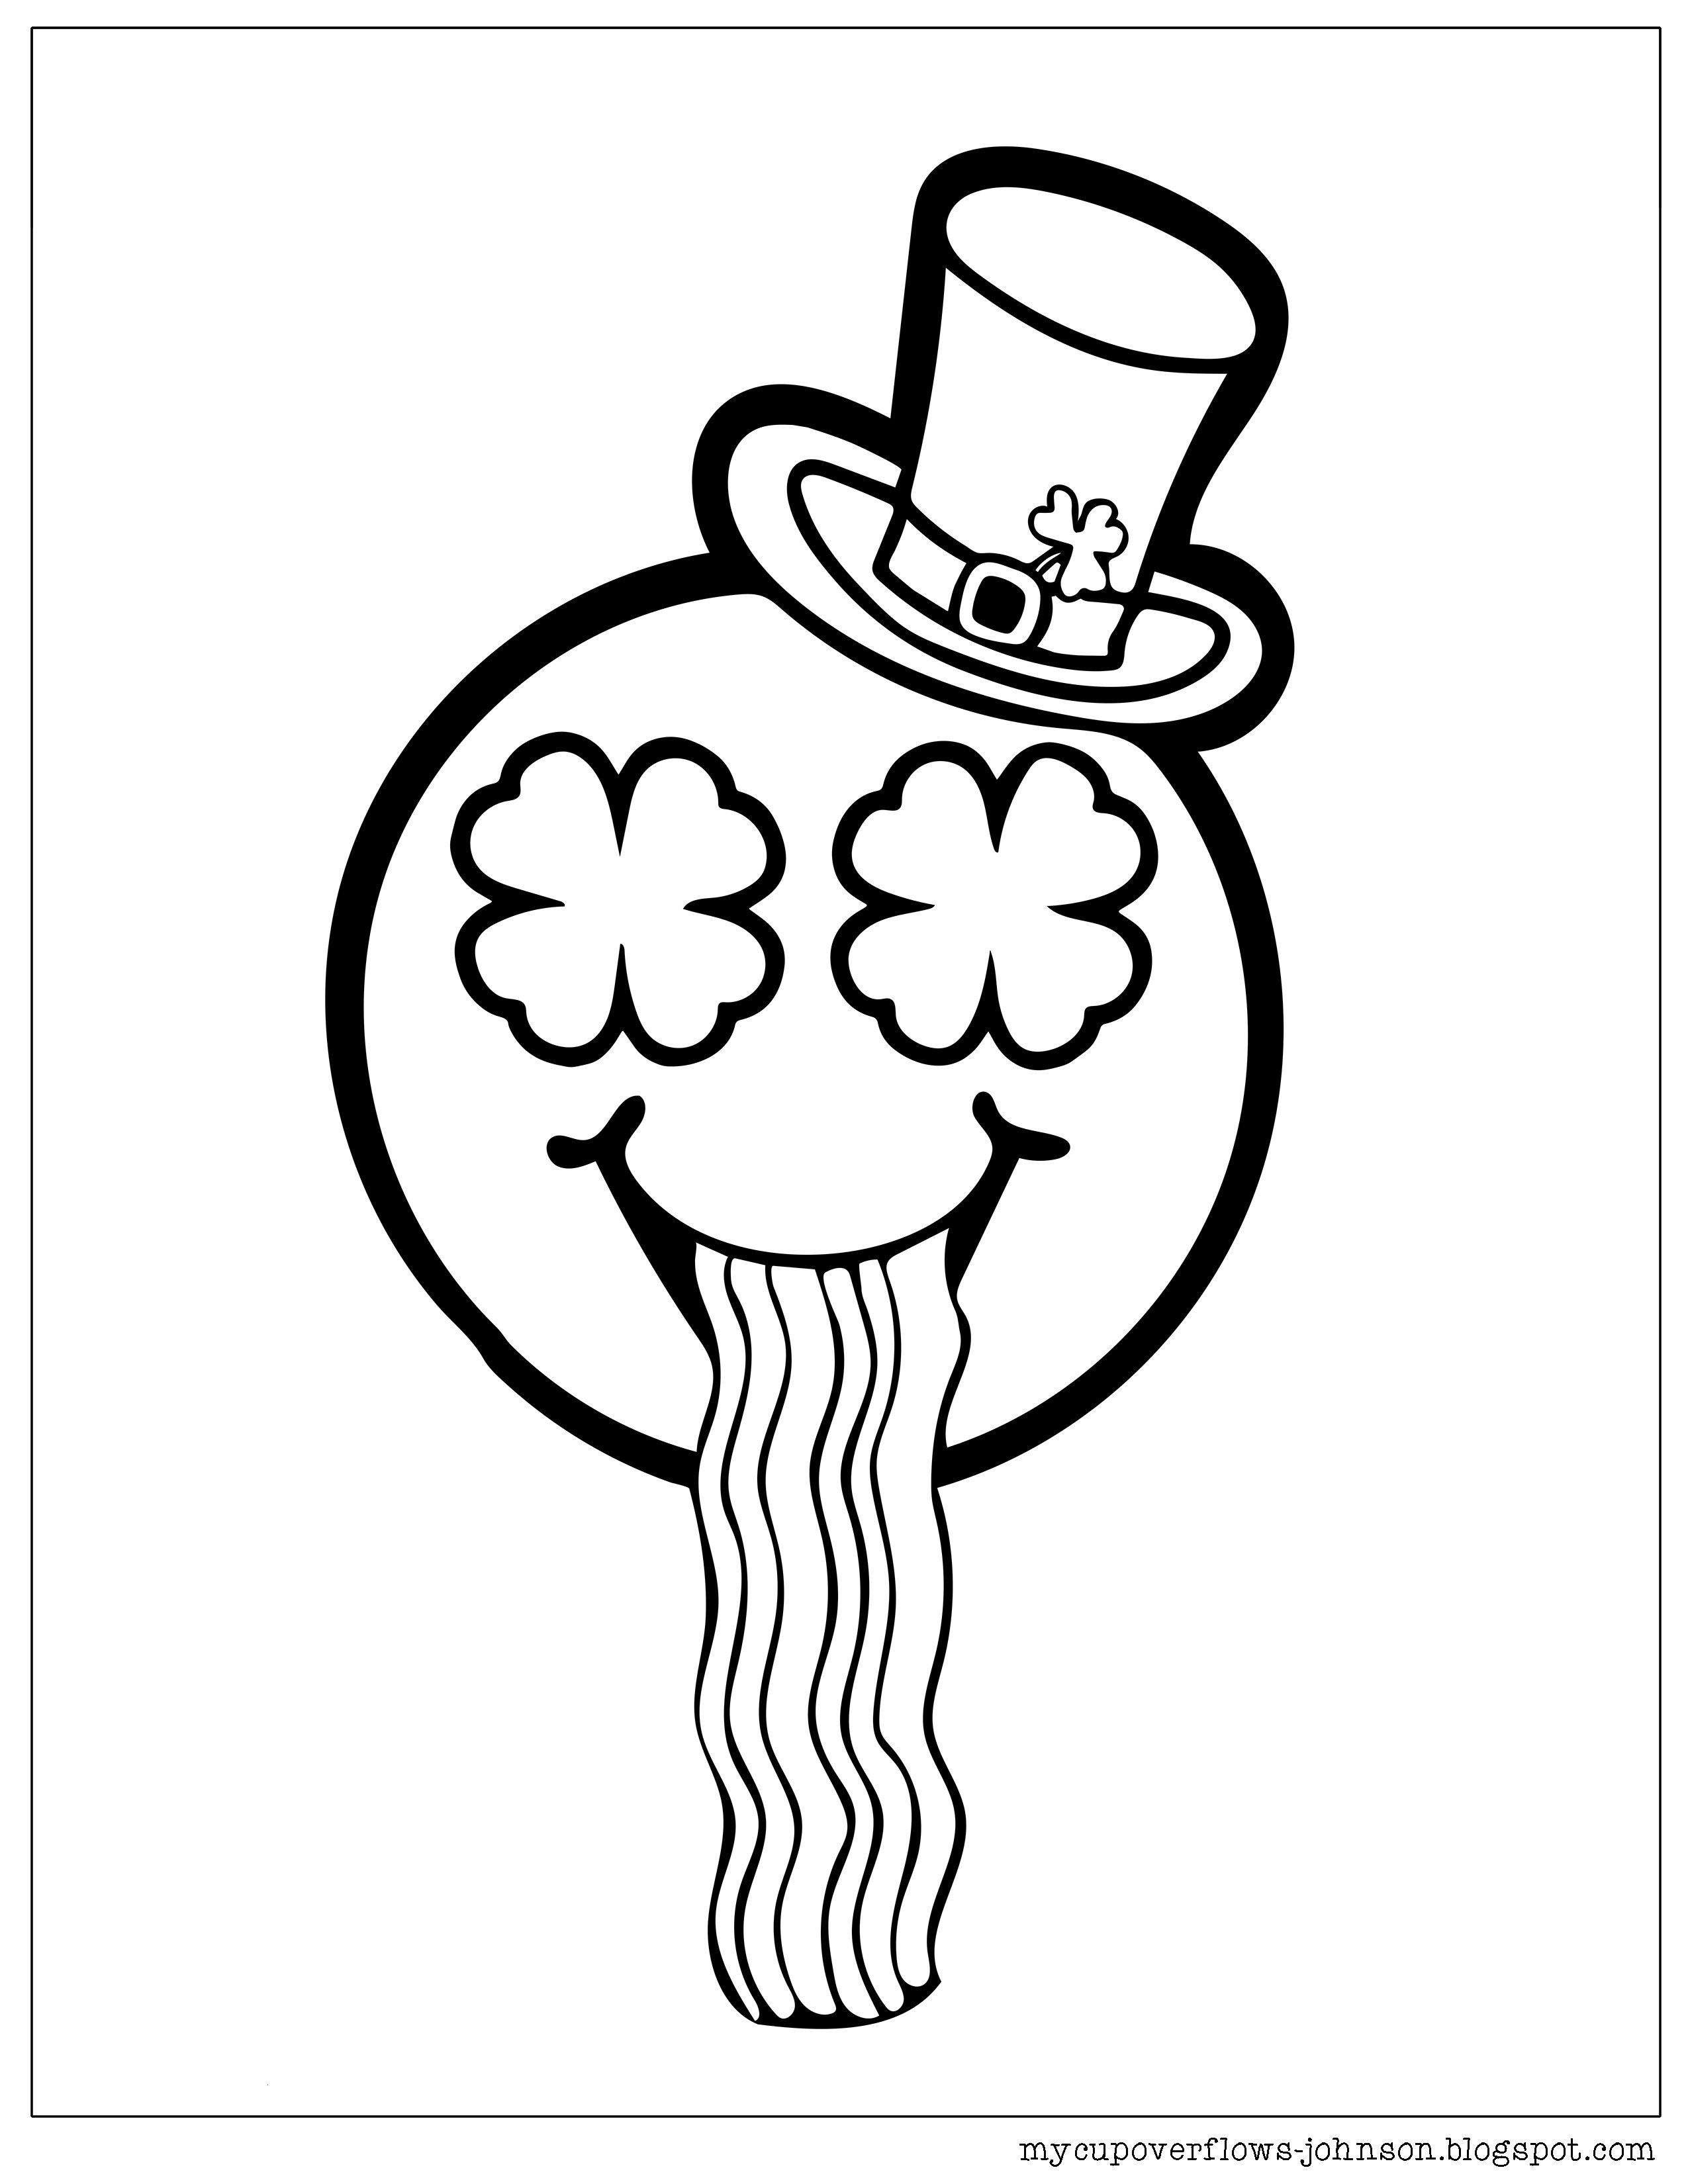 St patricks day coloring pages coloring pages manga coloring book minion coloring pages